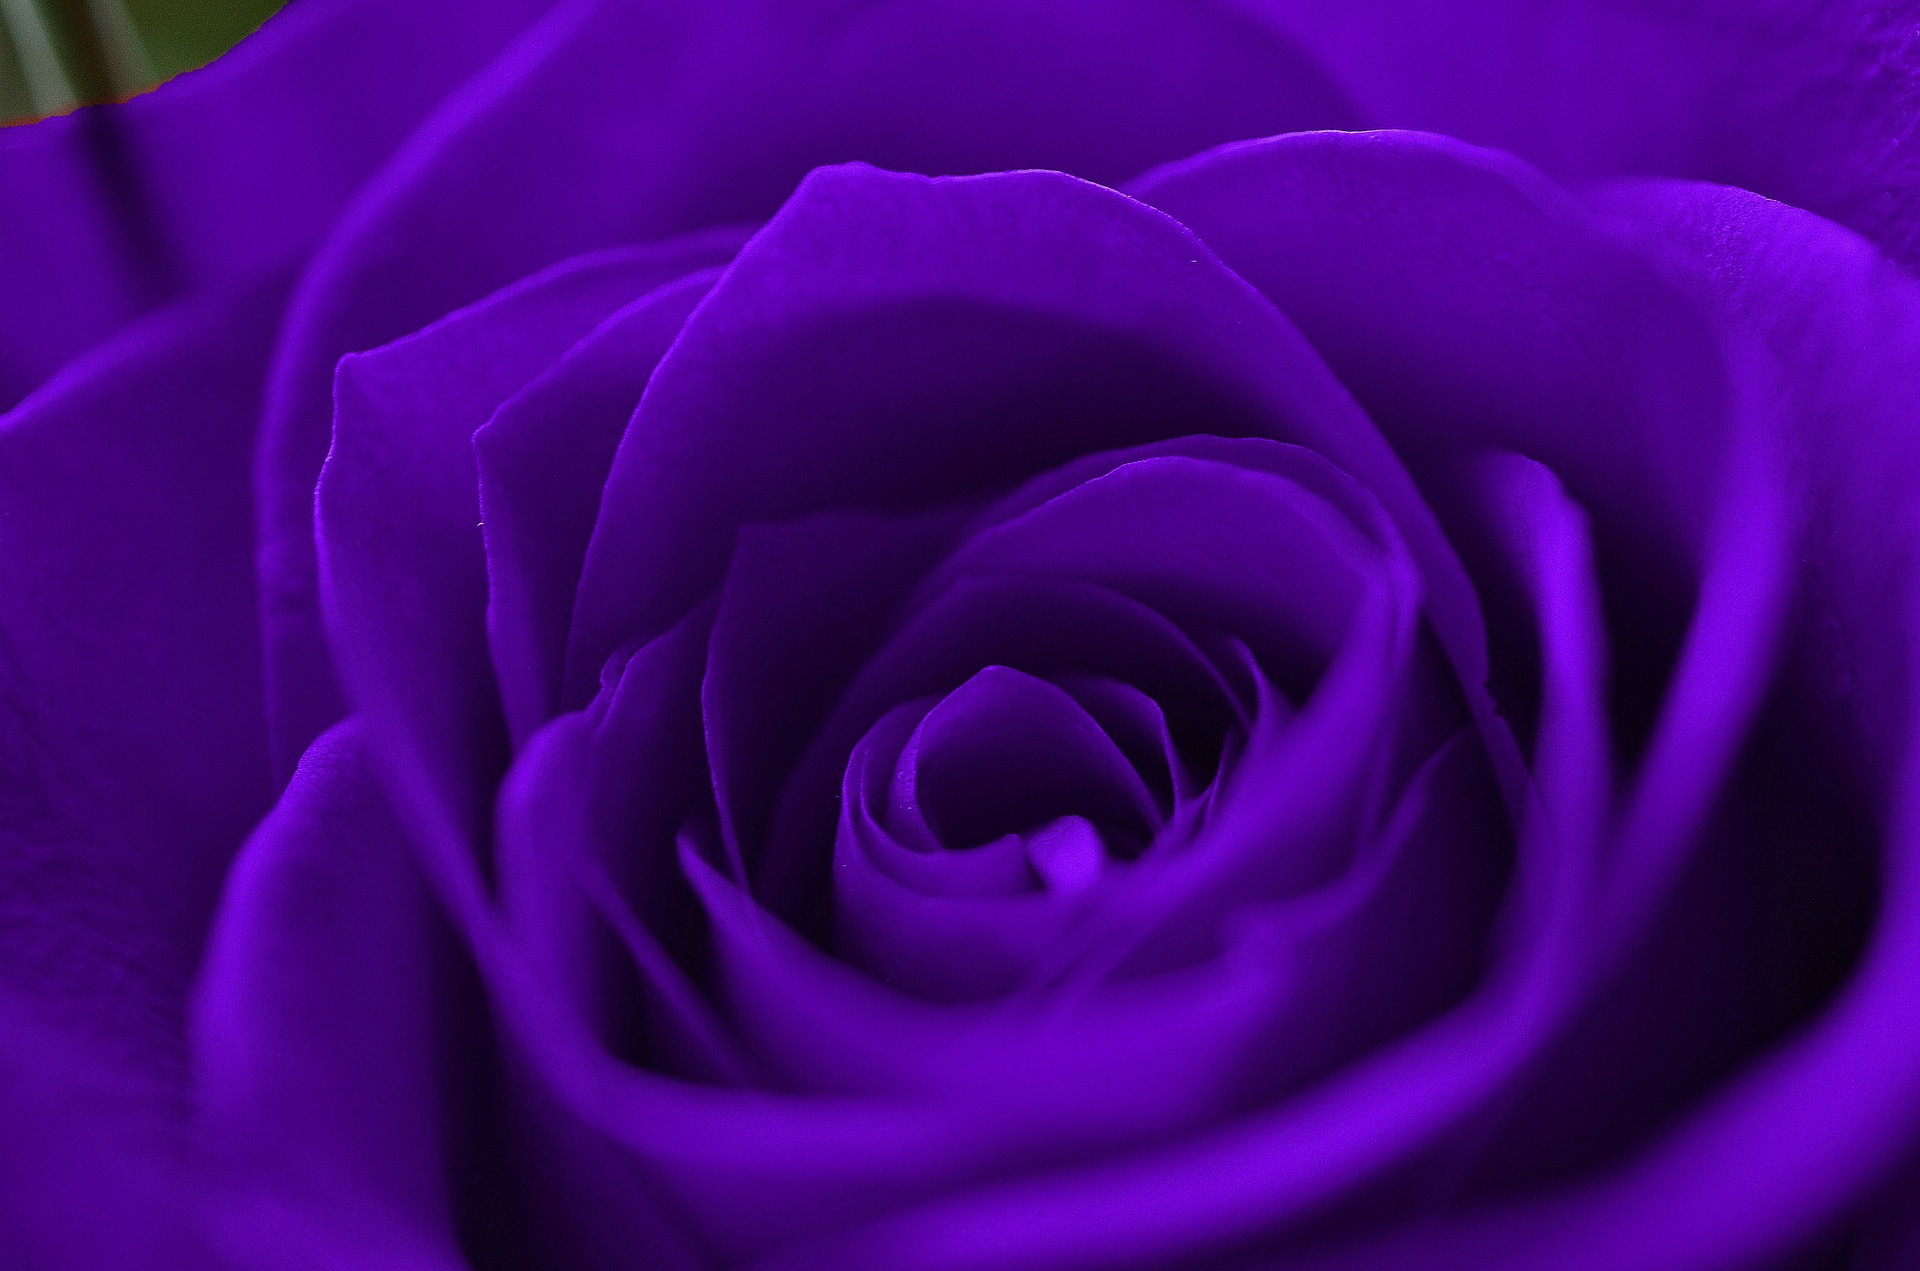  July 8 2015 By admin Comments Off on HD Wallpapers 1080p Purple Rose